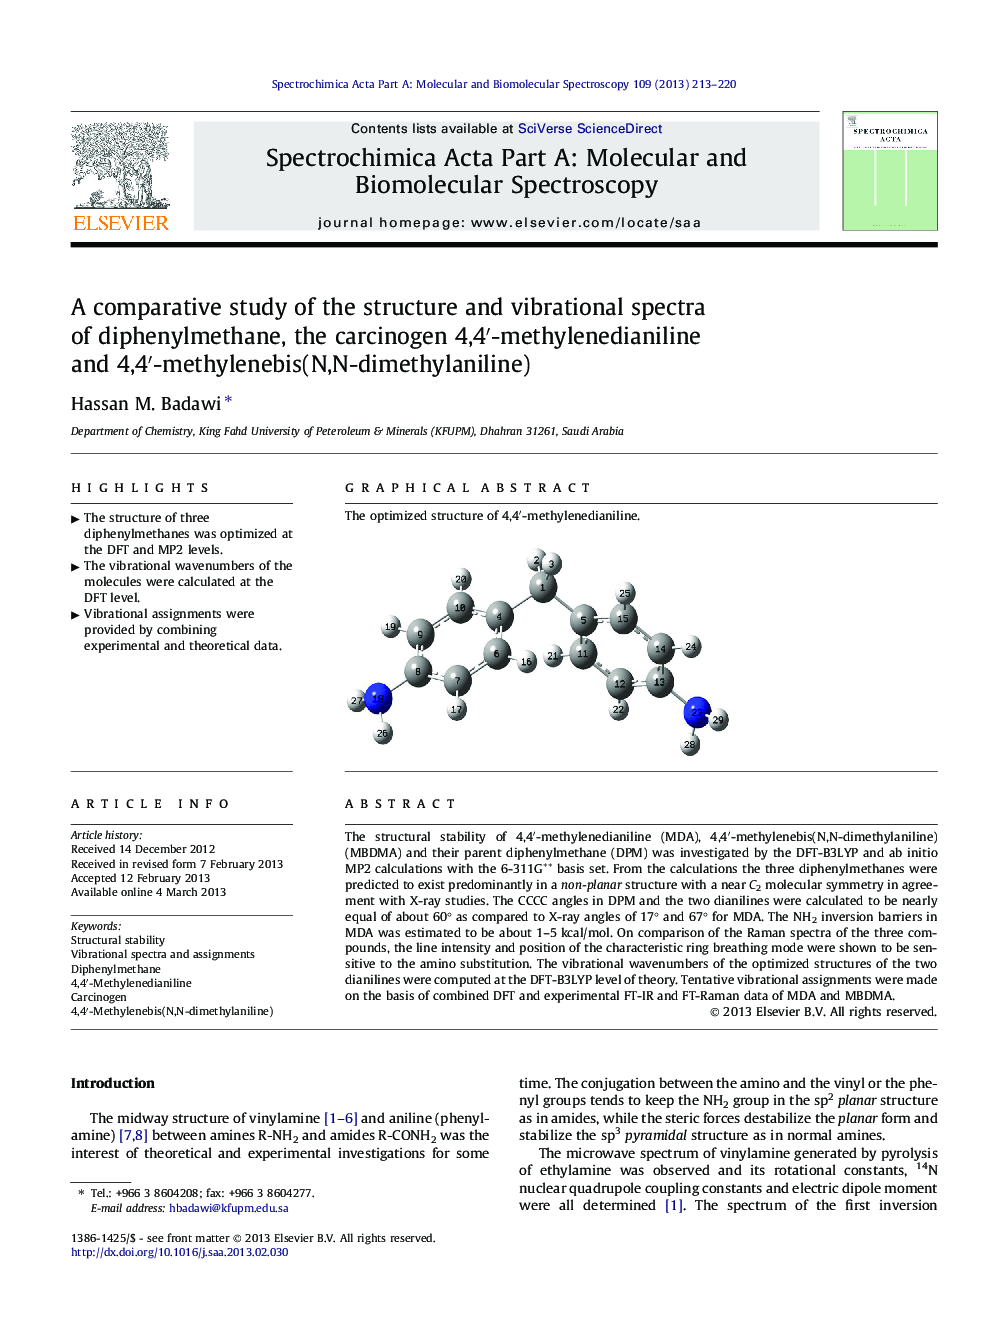 A comparative study of the structure and vibrational spectra of diphenylmethane, the carcinogen 4,4′-methylenedianiline and 4,4′-methylenebis(N,N-dimethylaniline)